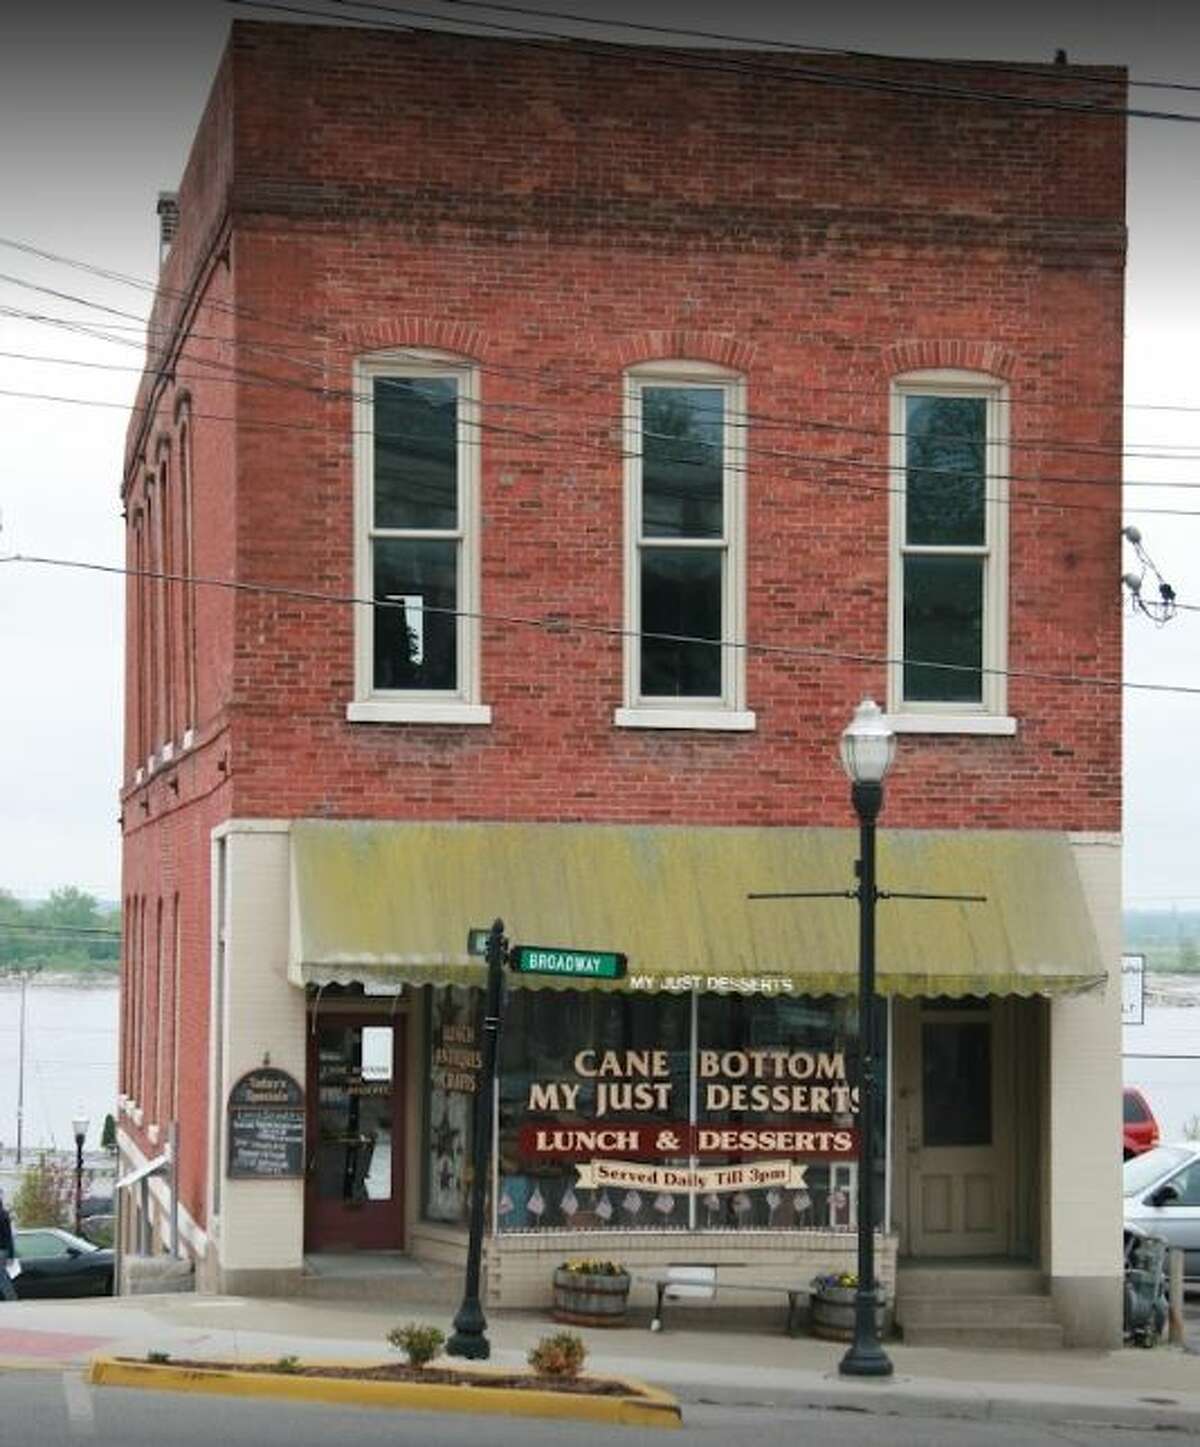 Alton’s Downtown Historic District, such as the building that houses My Just Desserts at 31 E. Broadway, is officially listed in the National Register of Historic Places as part of an expansion of the city's Middletown Historic District.